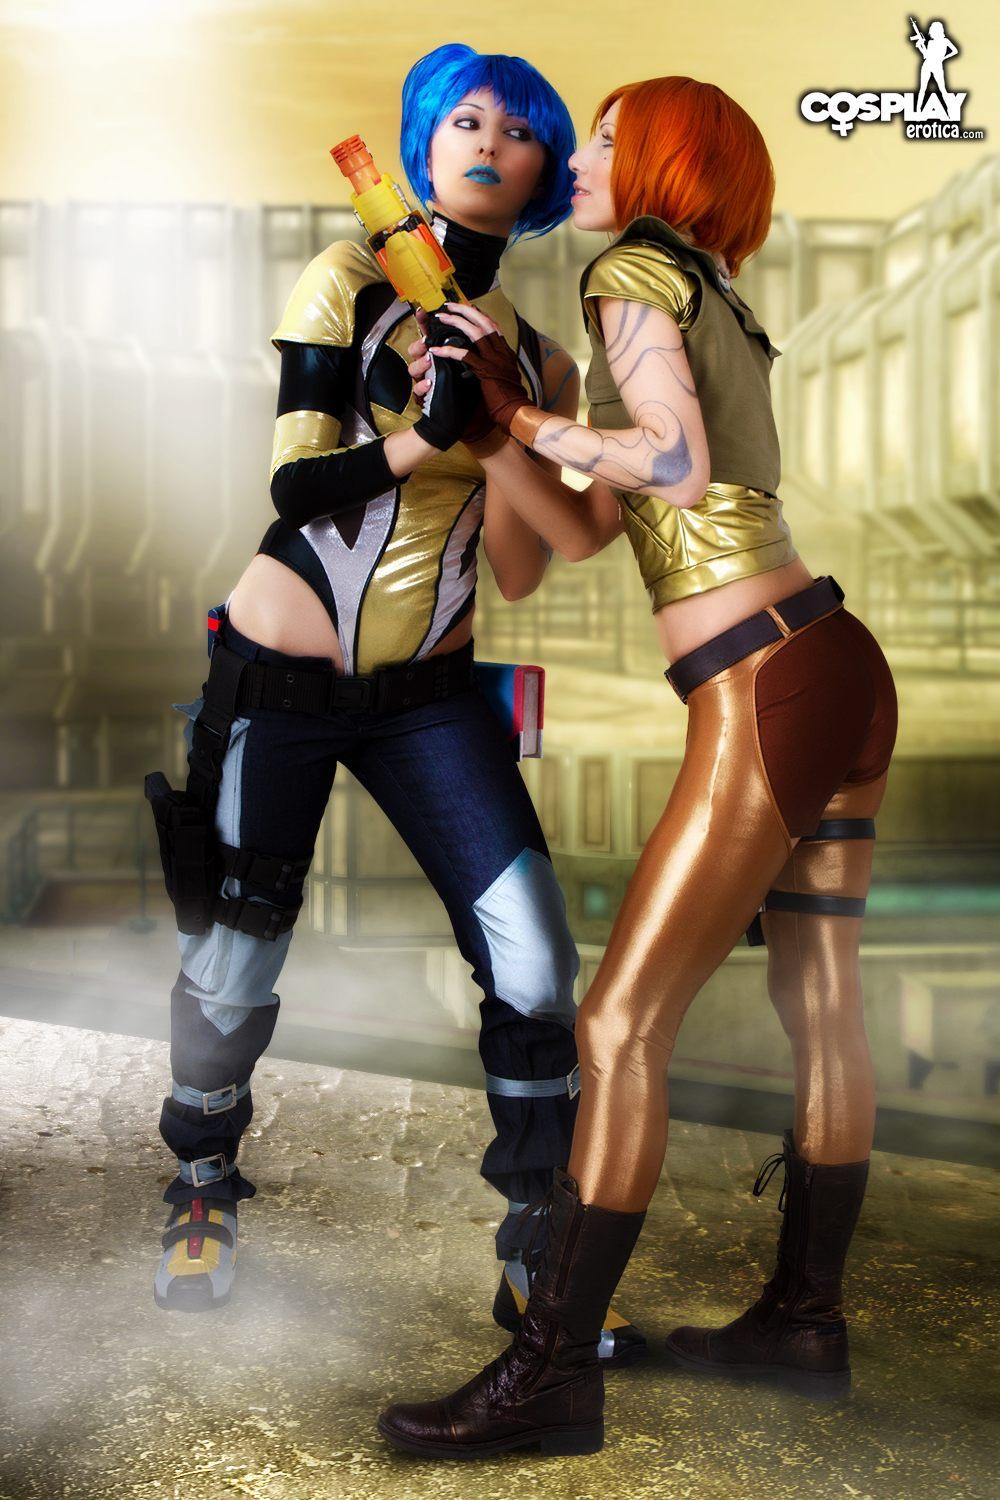 Hot cosplayers Anne and Angela do a sexy Borderlands lesbian scene #53179656